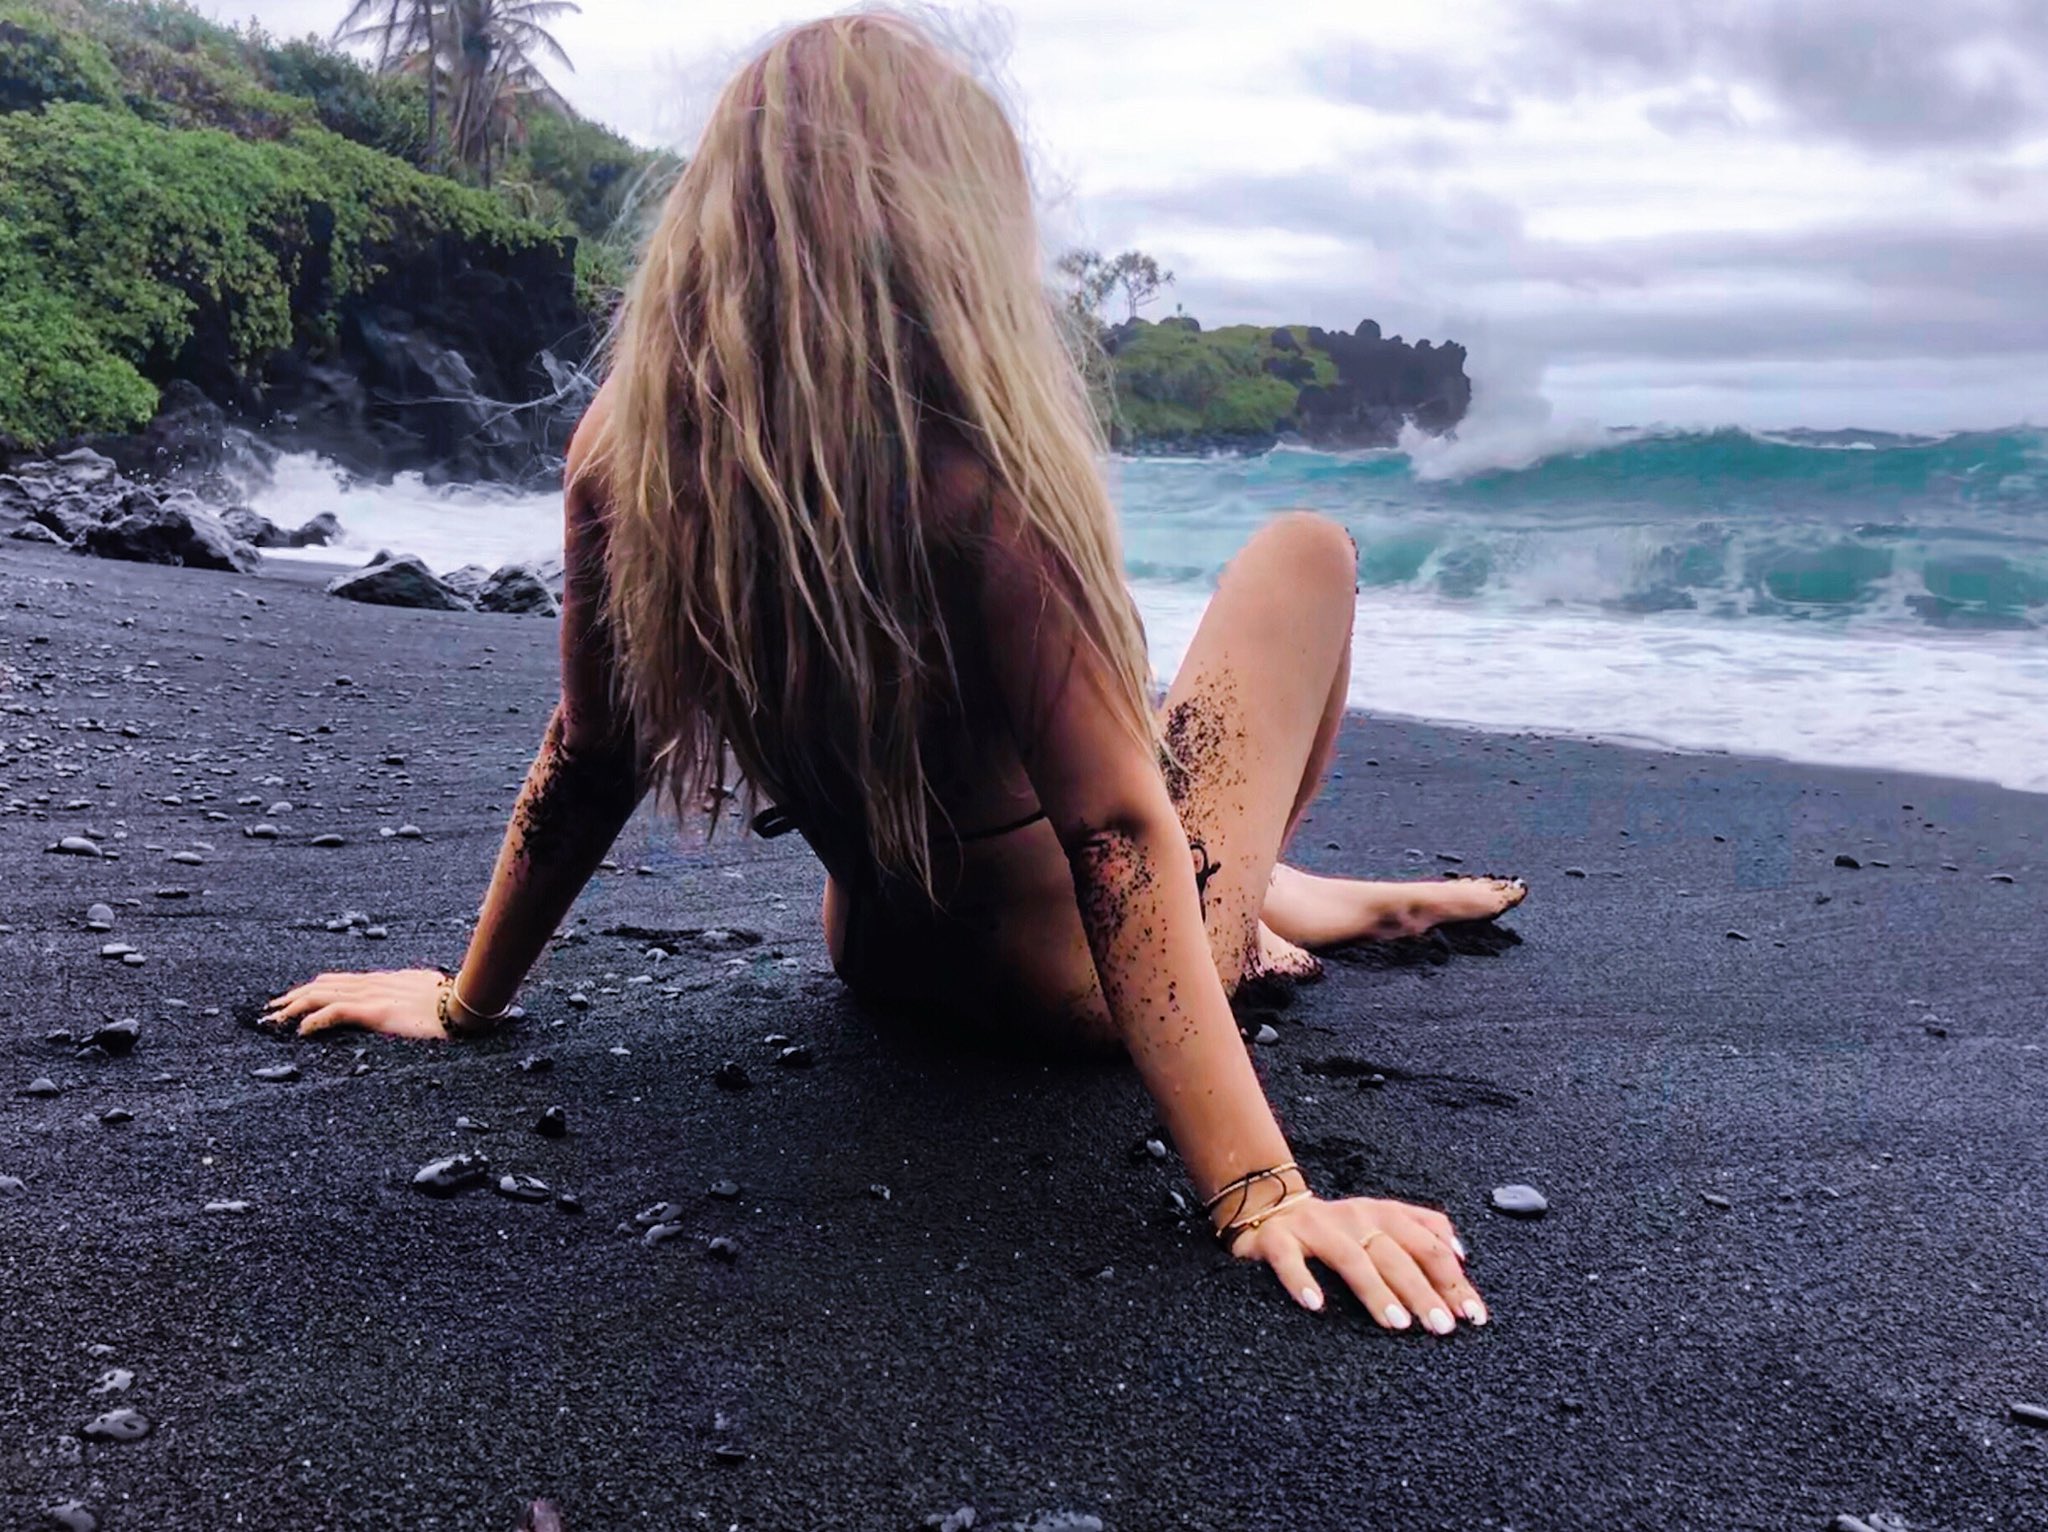 Hassie Harrison on Twitter: "Finally found me a black sand b